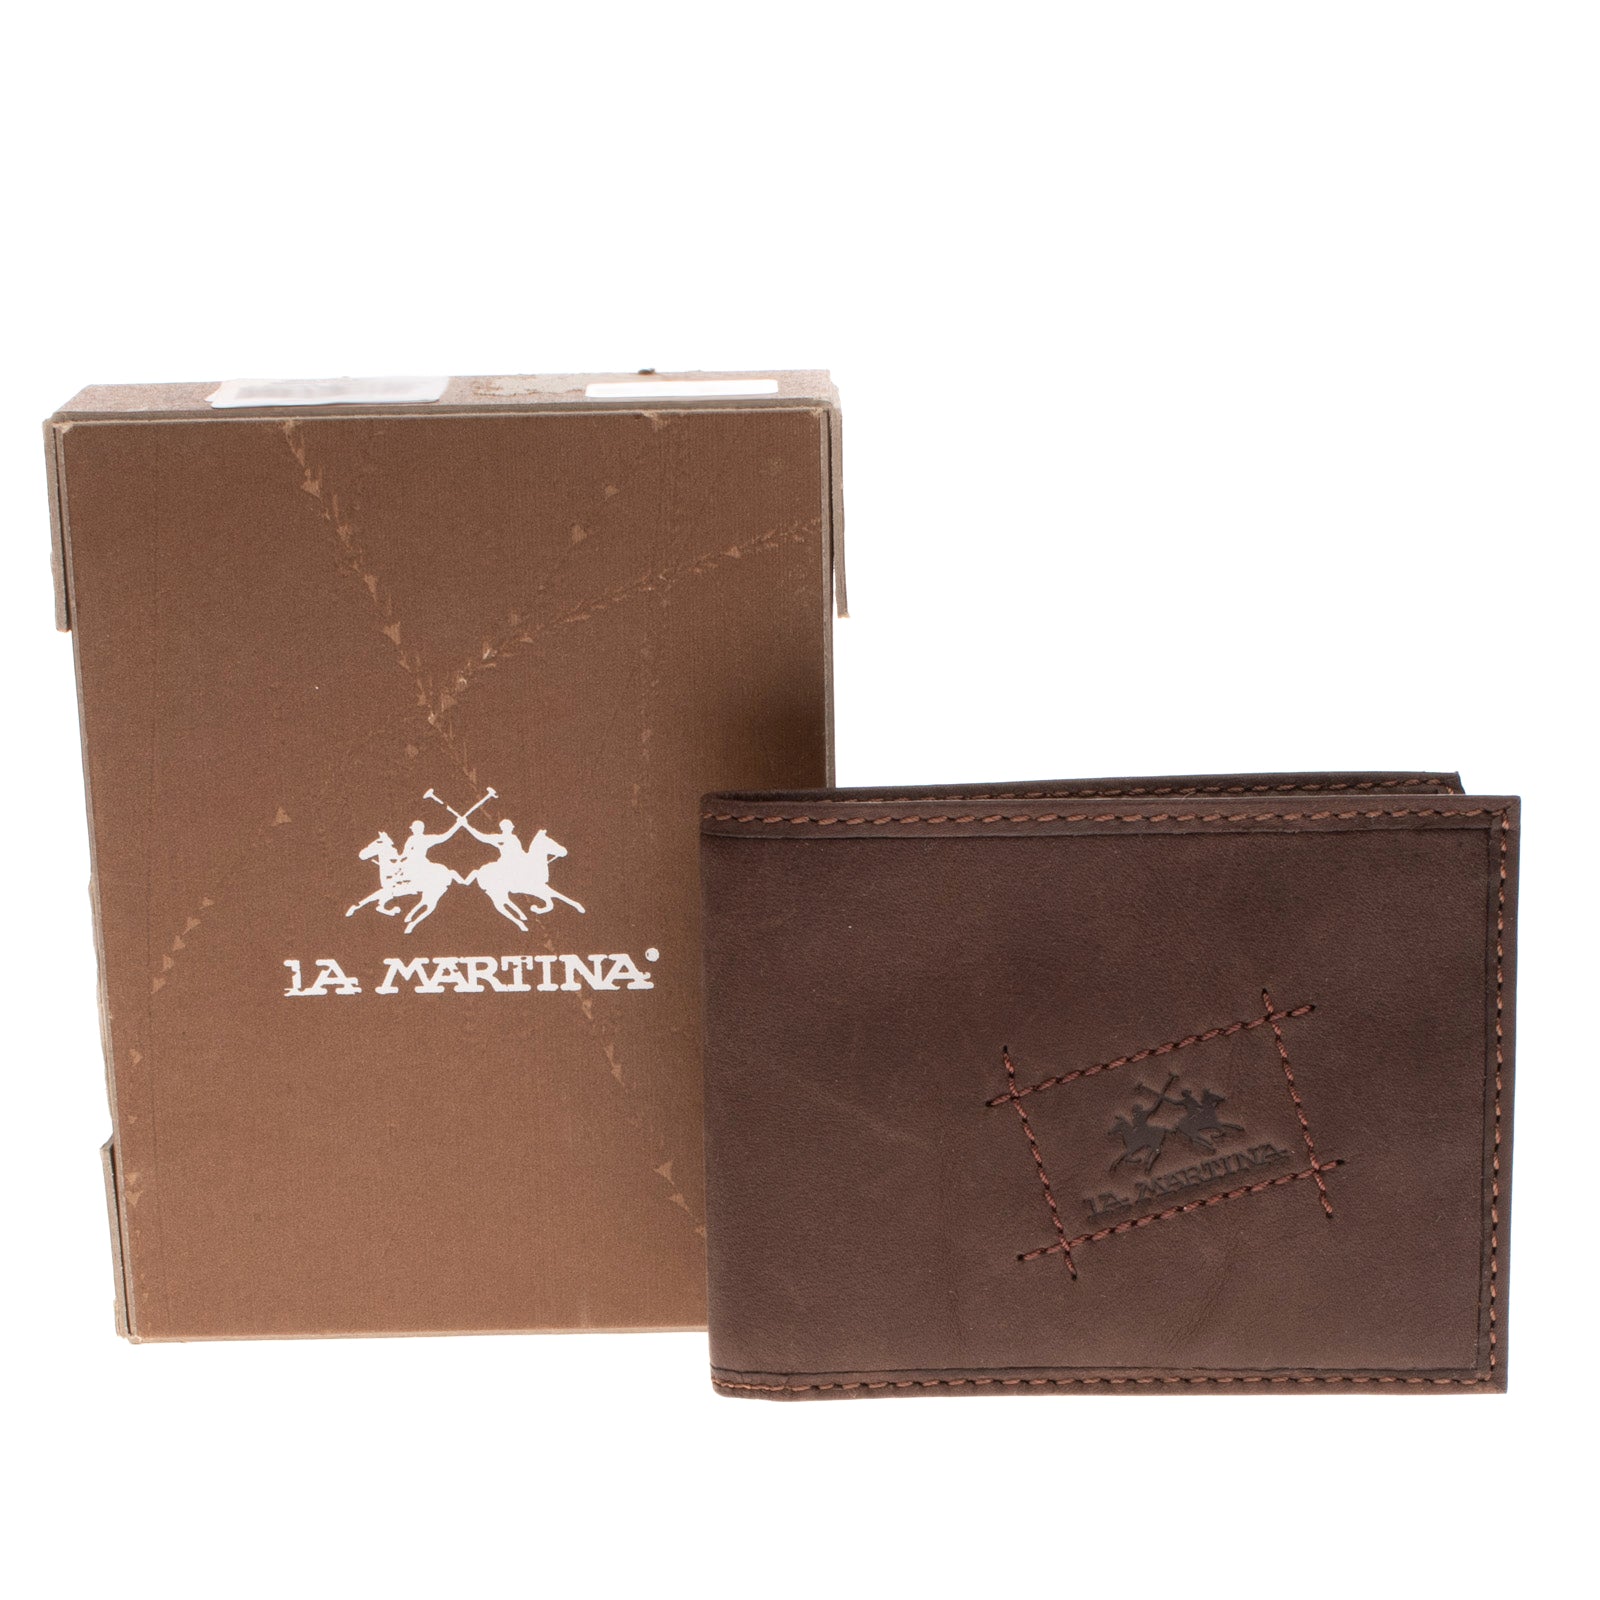 LA MARTINA Leather Bifold Wallet HANDMADE Vintage -Look Embossed - Stitched gallery main photo